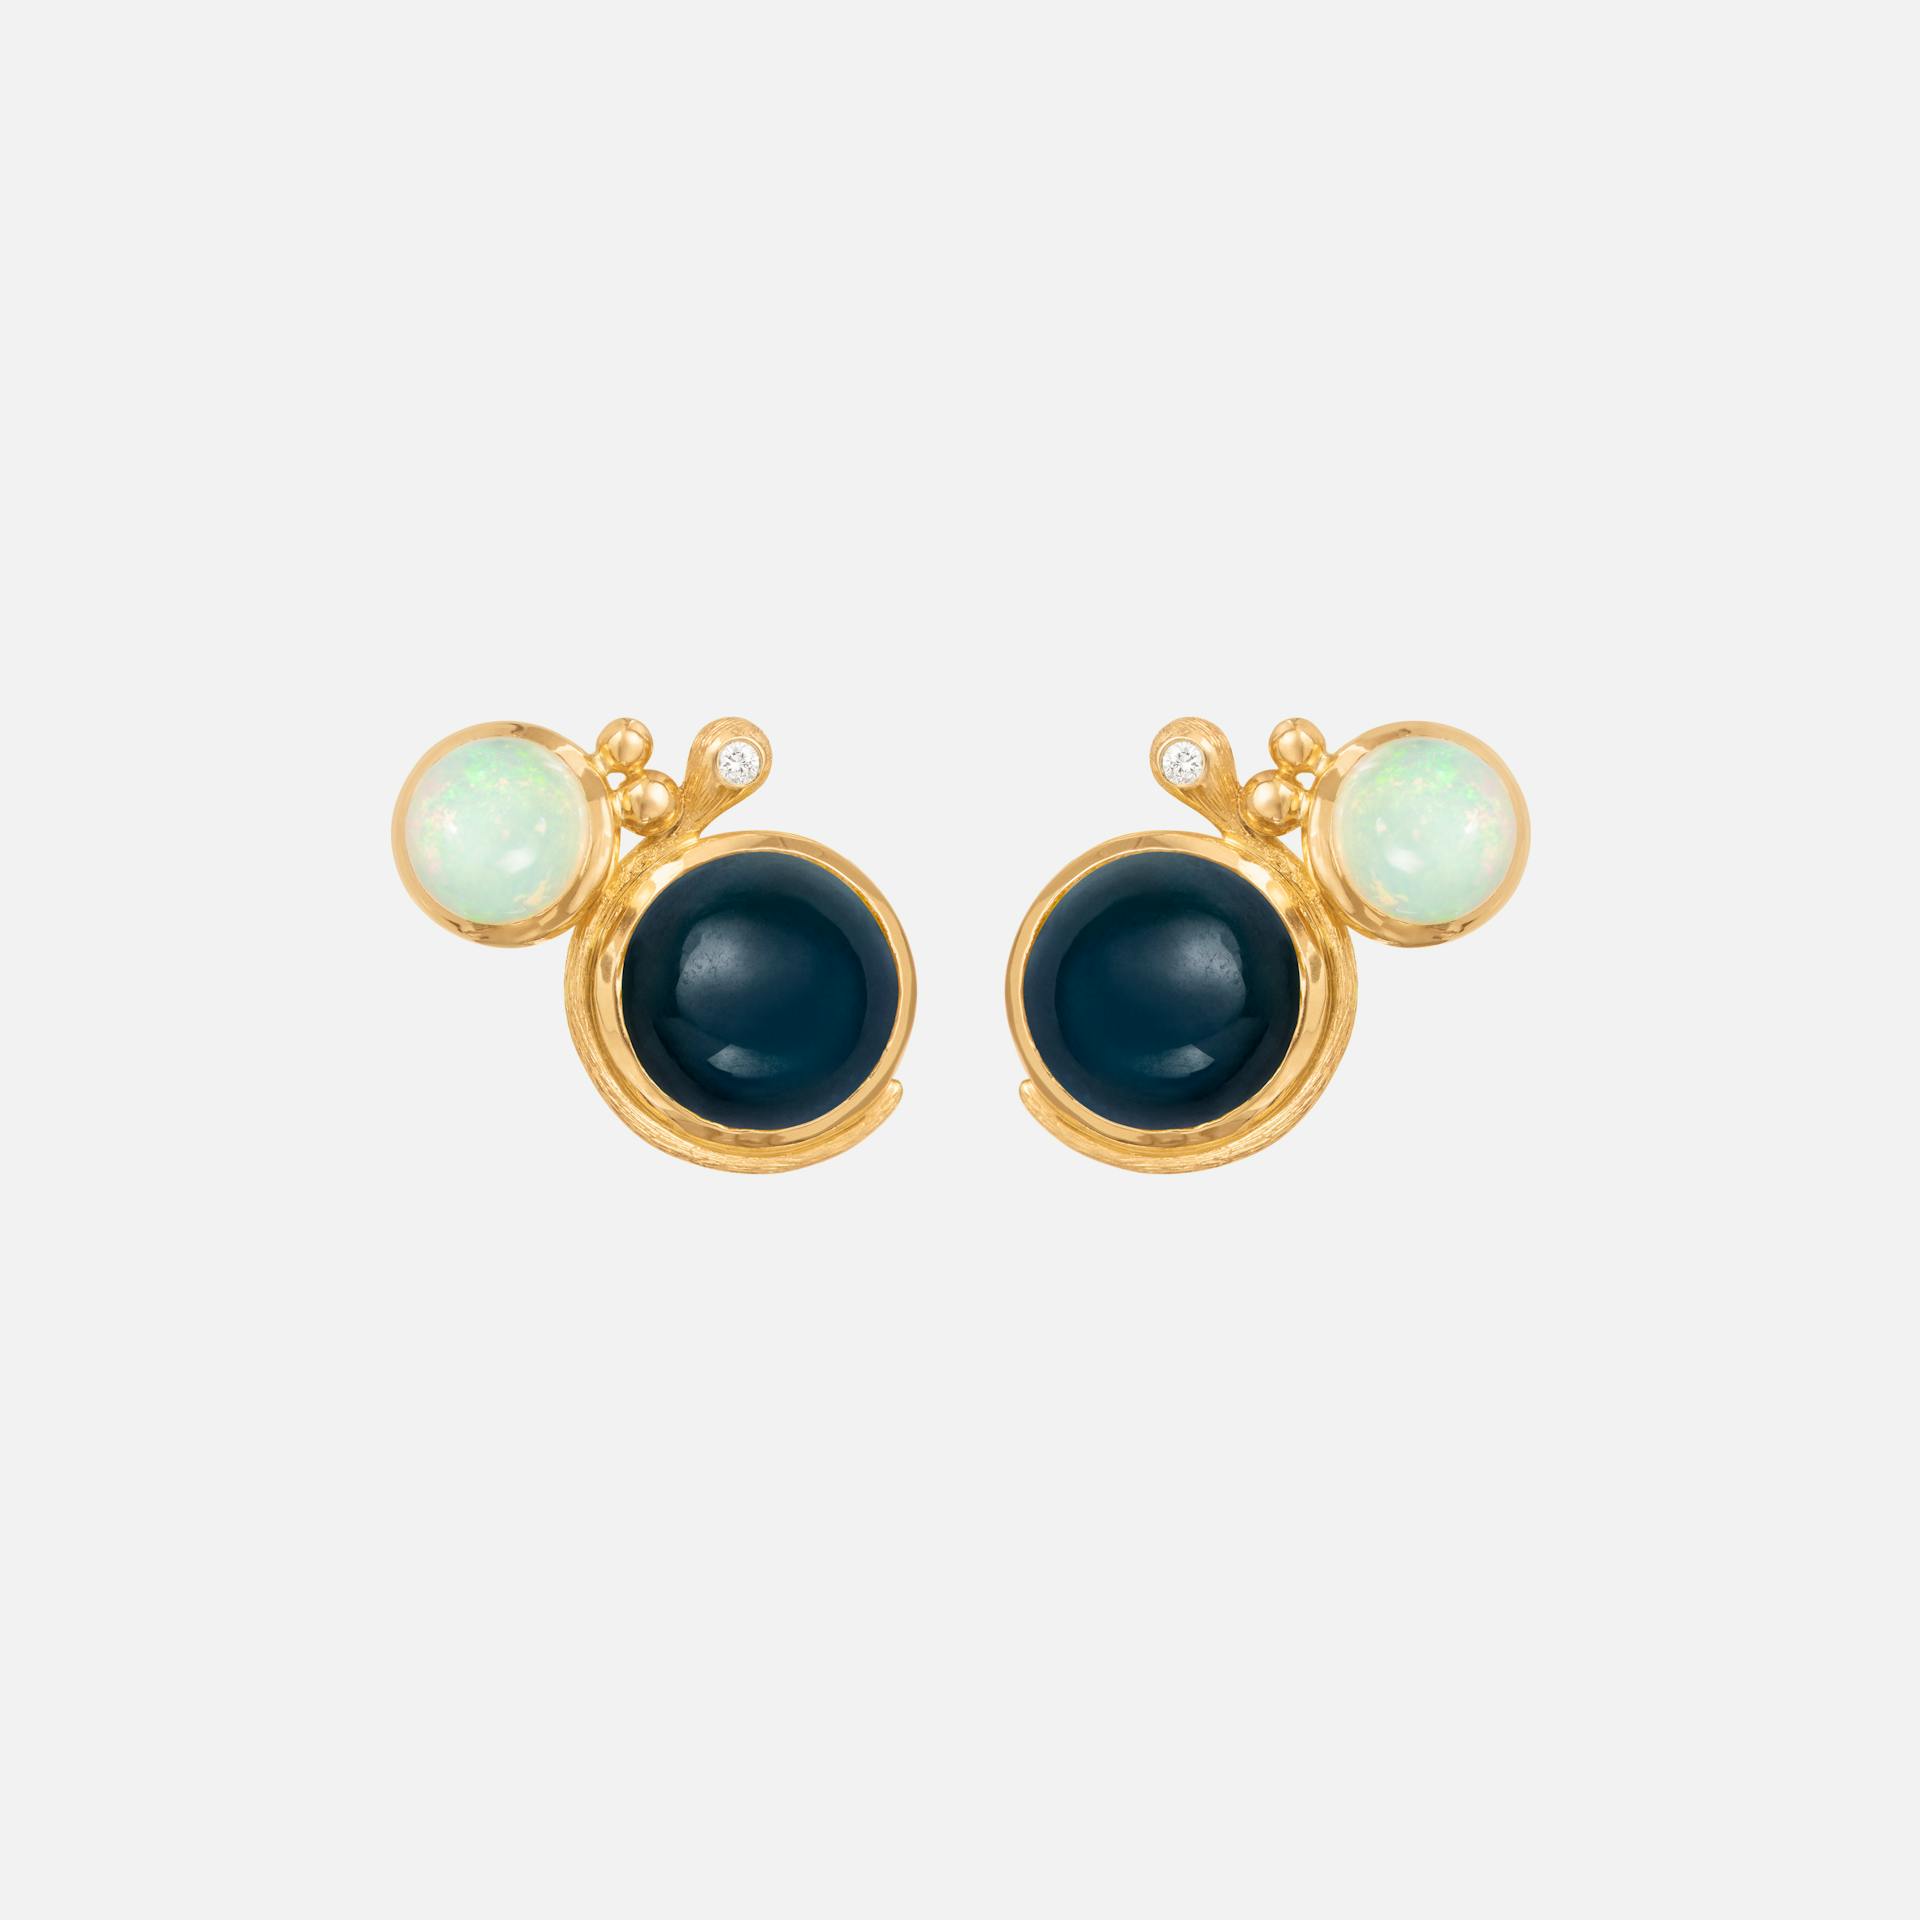 Lotus stud earrings 18k gold with opal and London blue topaz